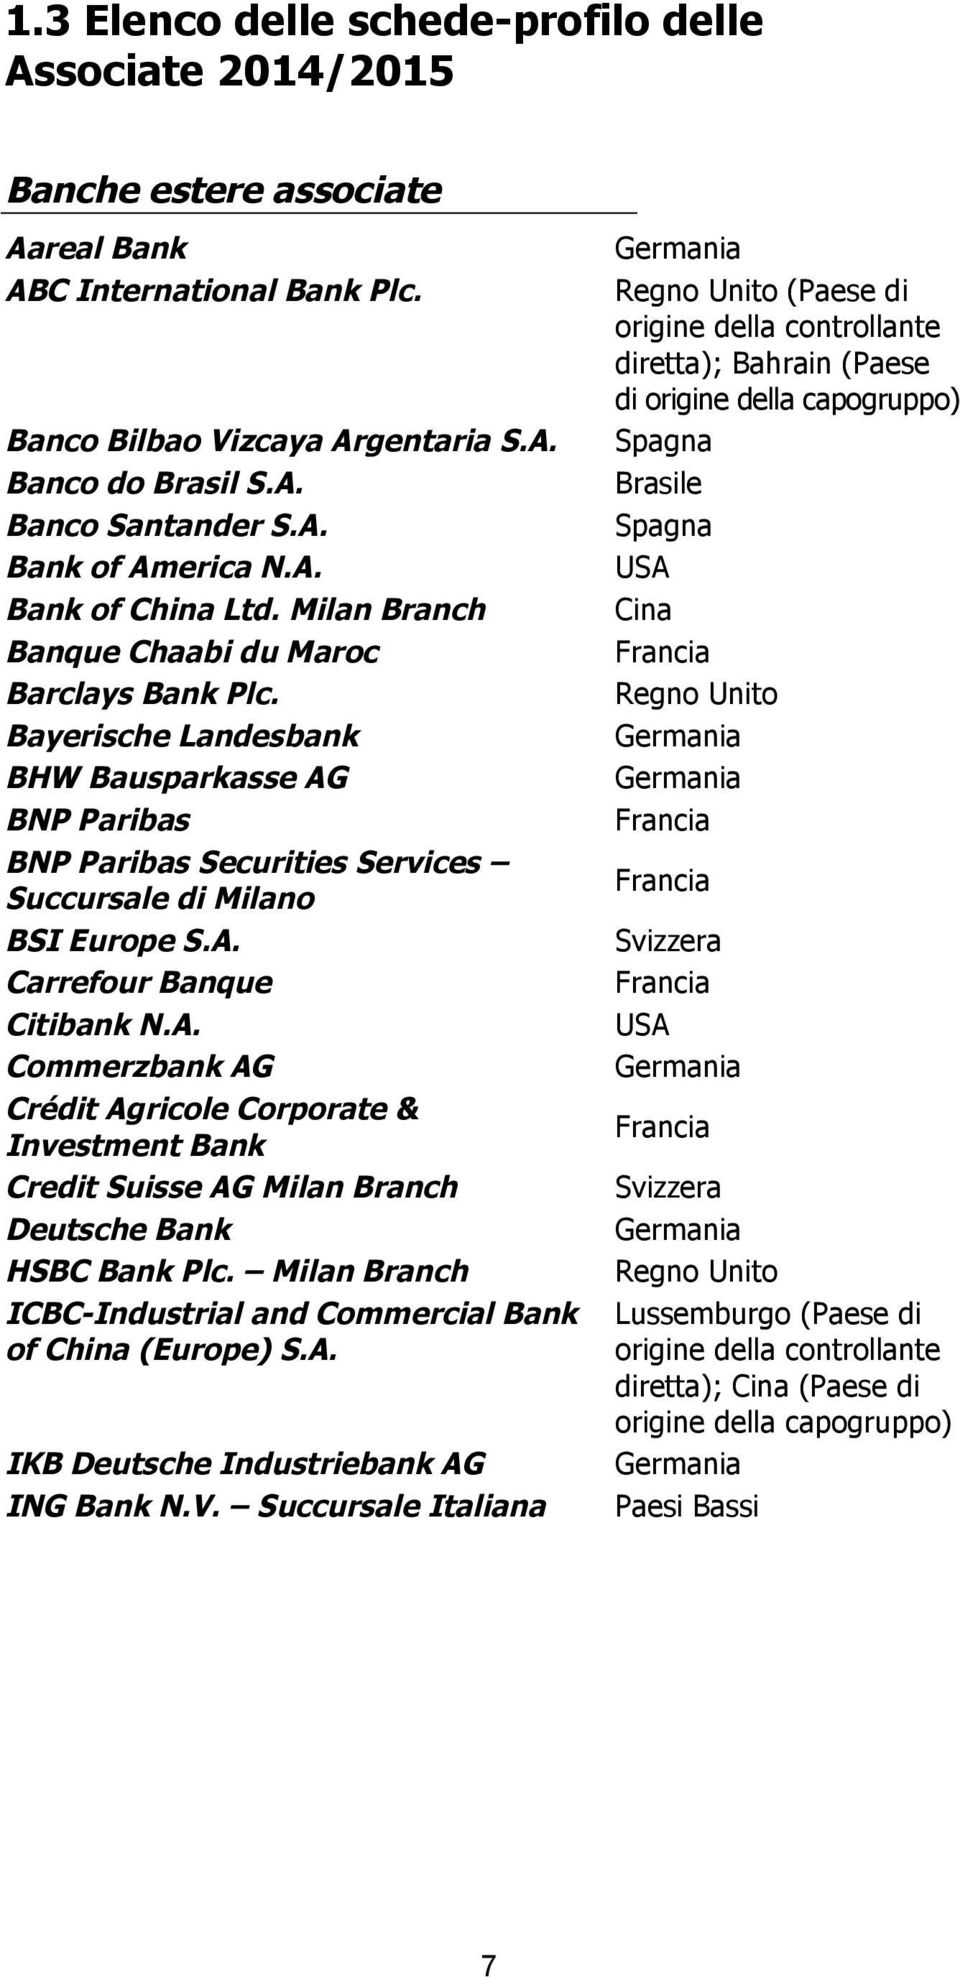 A. Commerzbank AG Crédit Agricole Corporate & Investment Bank Credit Suisse AG Milan Branch Deutsche Bank HSBC Bank Plc. Milan Branch ICBC-Industrial and Commercial Bank of China (Europe) S.A. IKB Deutsche Industriebank AG ING Bank N.